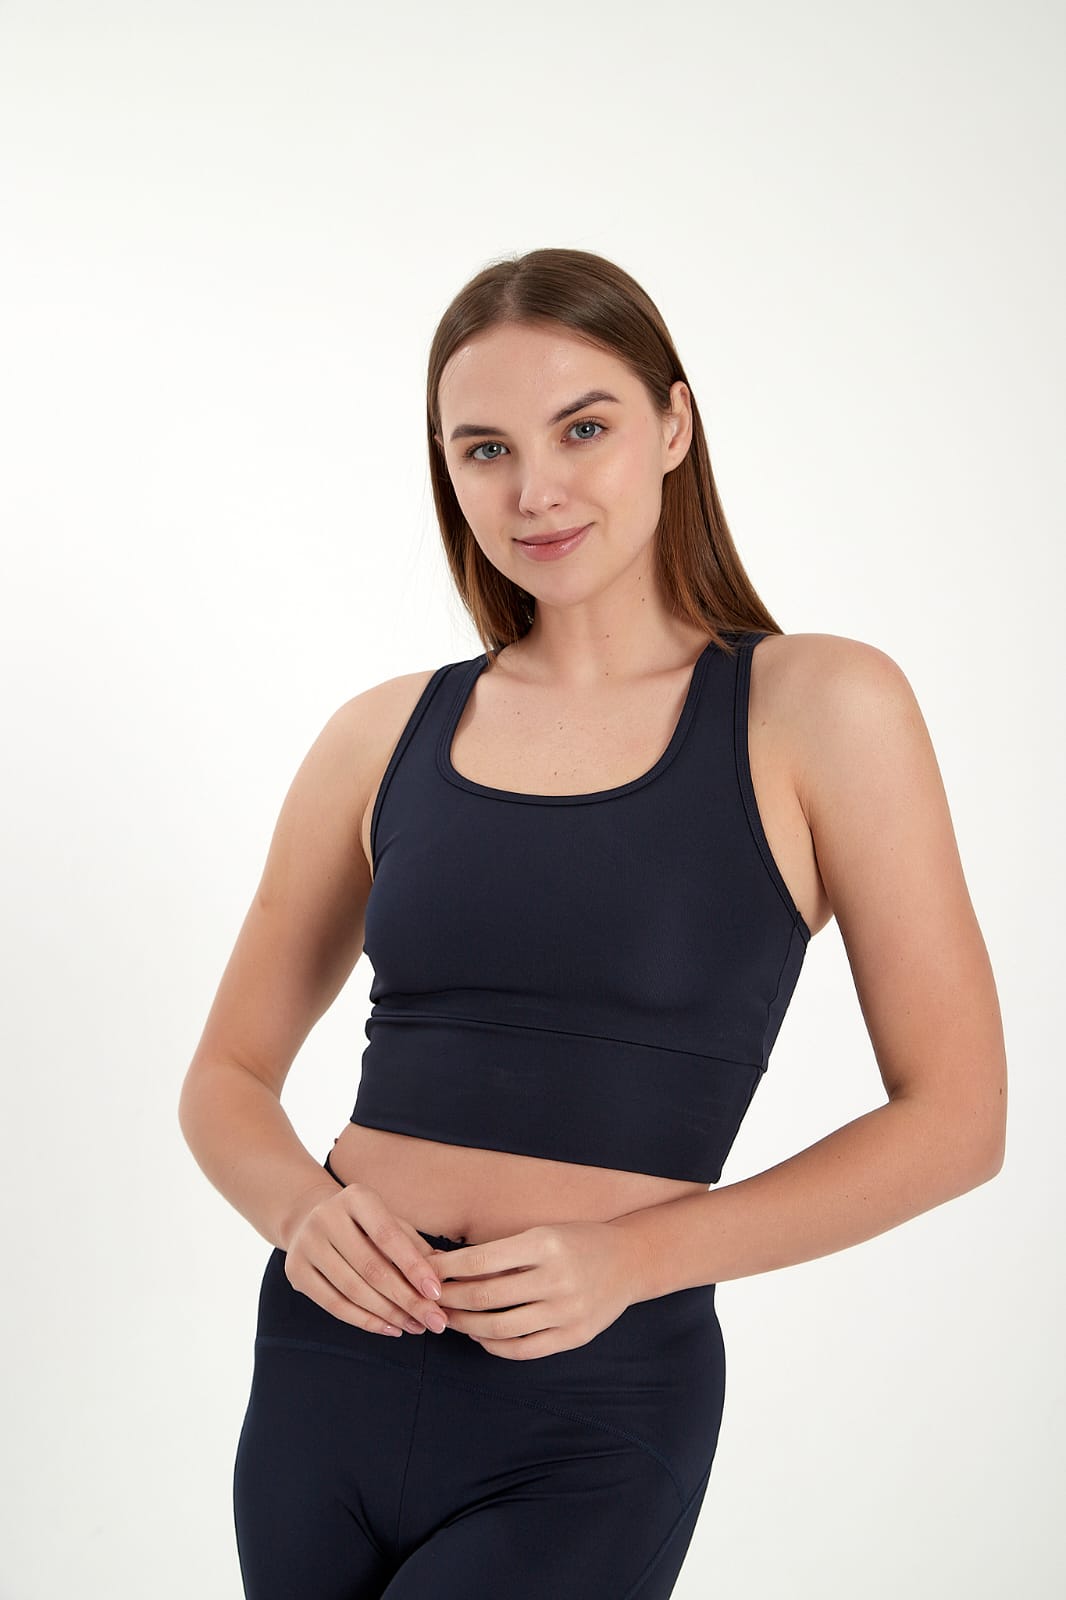 Juniors' and Women's Sports Top Bra, Soft, Tag Less Super Comfortable Activewear - Wear Sierra